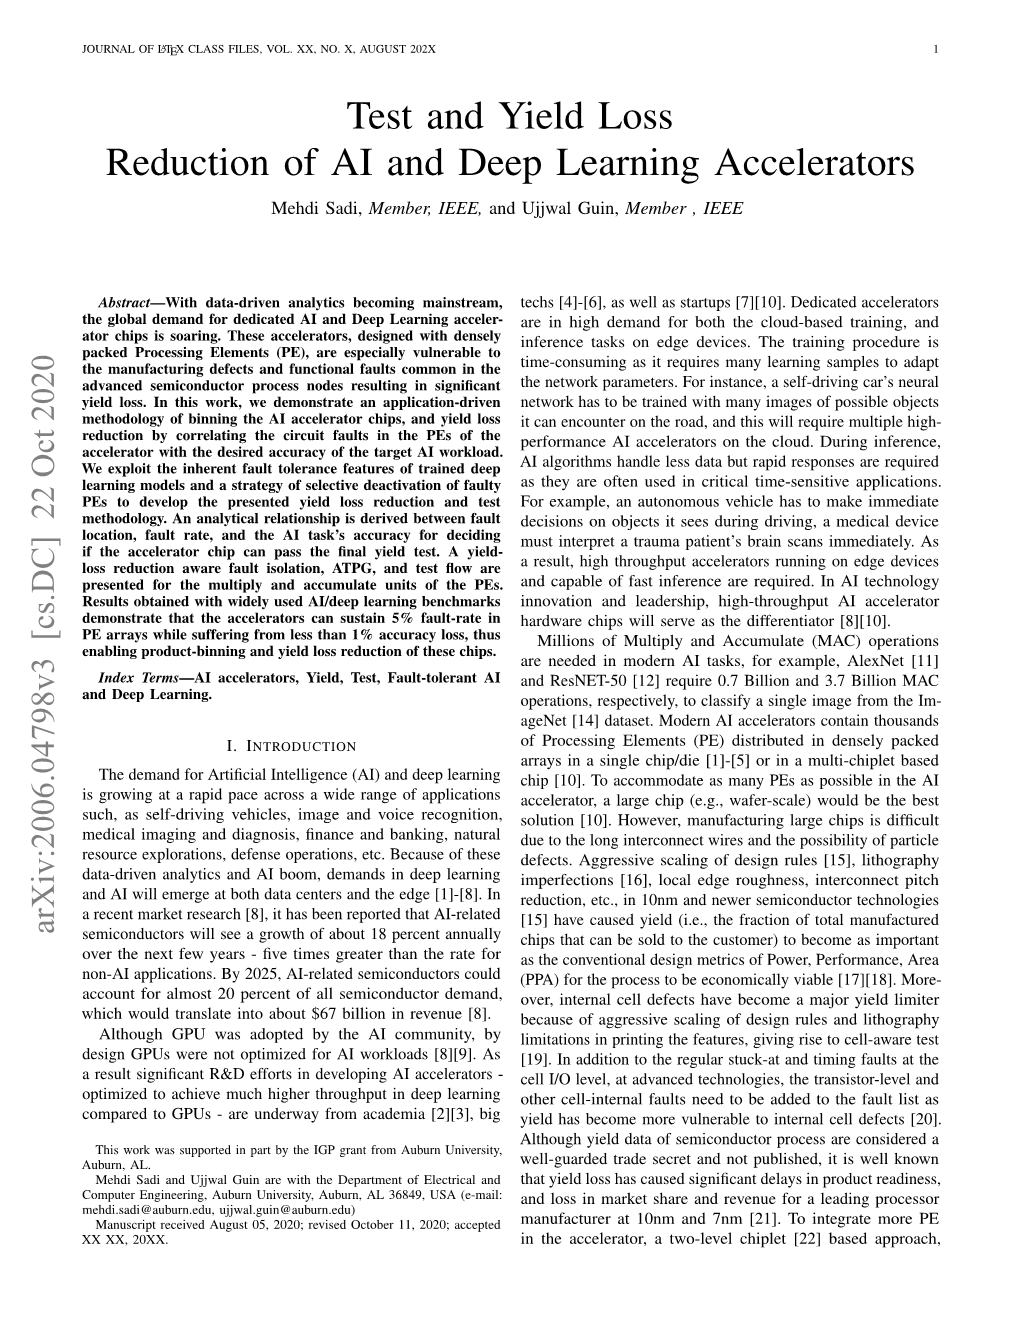 Test and Yield Loss Reduction of AI and Deep Learning Accelerators Mehdi Sadi, Member, IEEE, and Ujjwal Guin, Member , IEEE